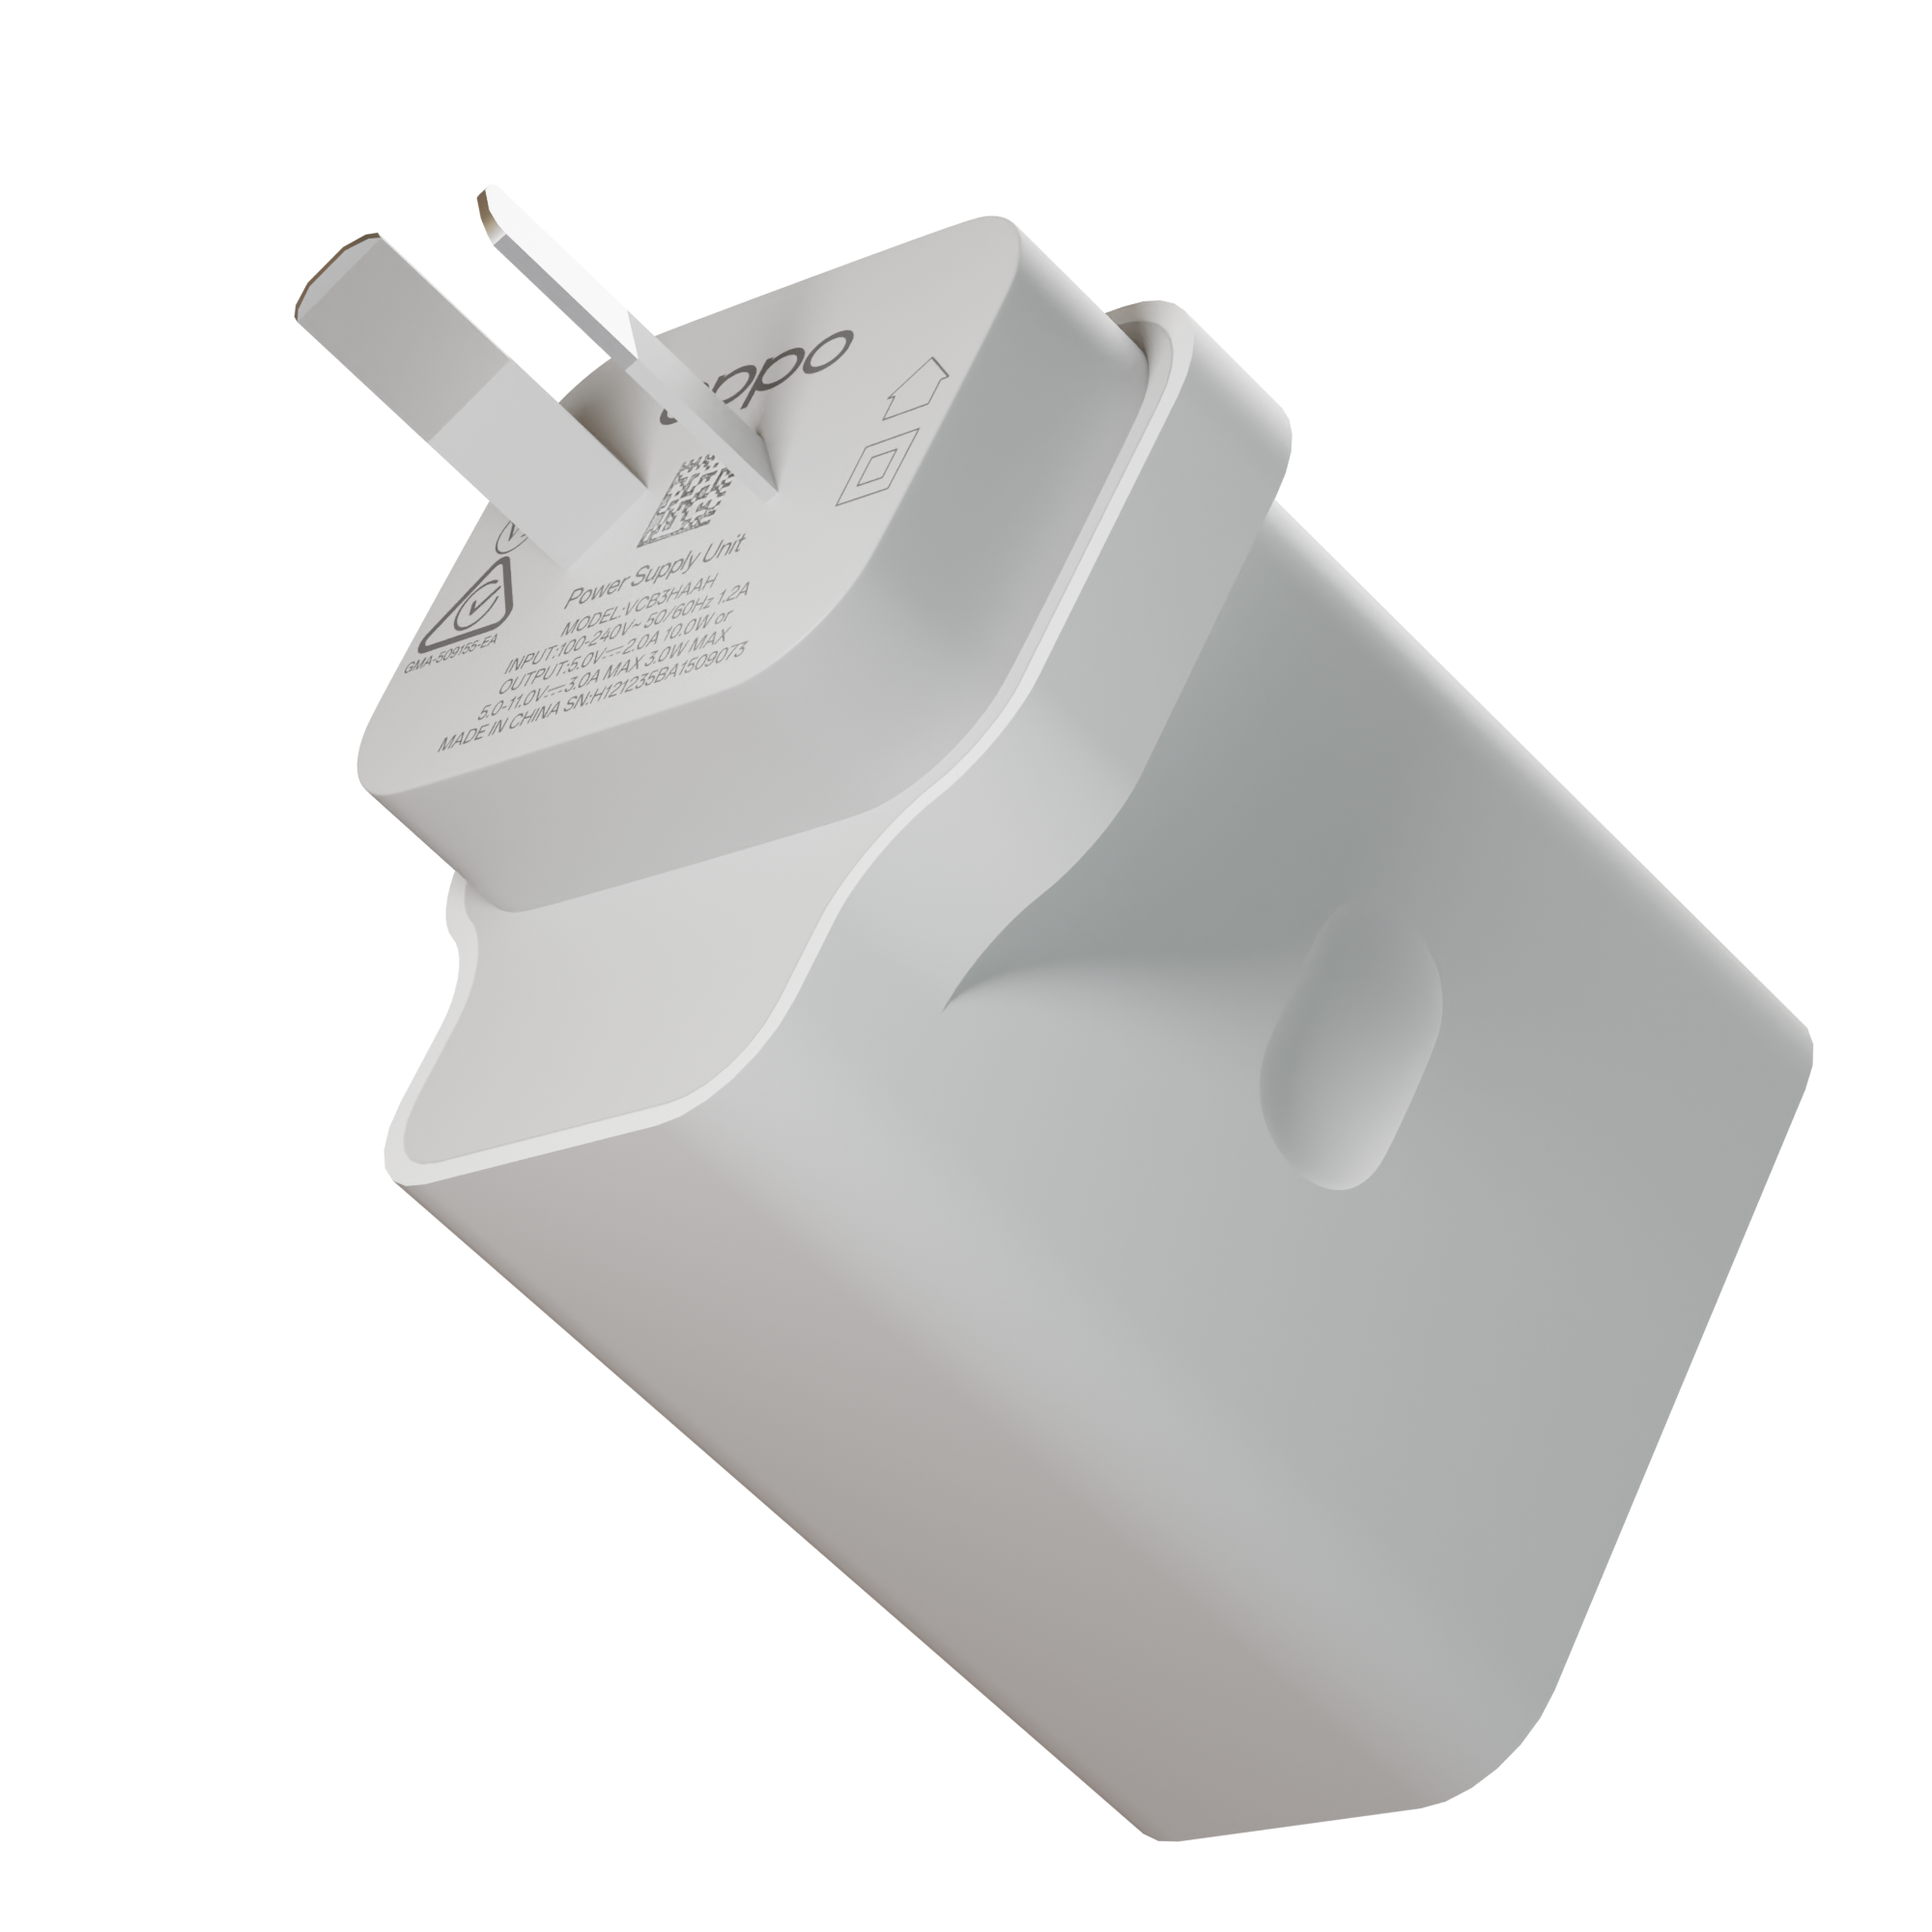 OPPO SUPERVOOC 33W Wall Charger